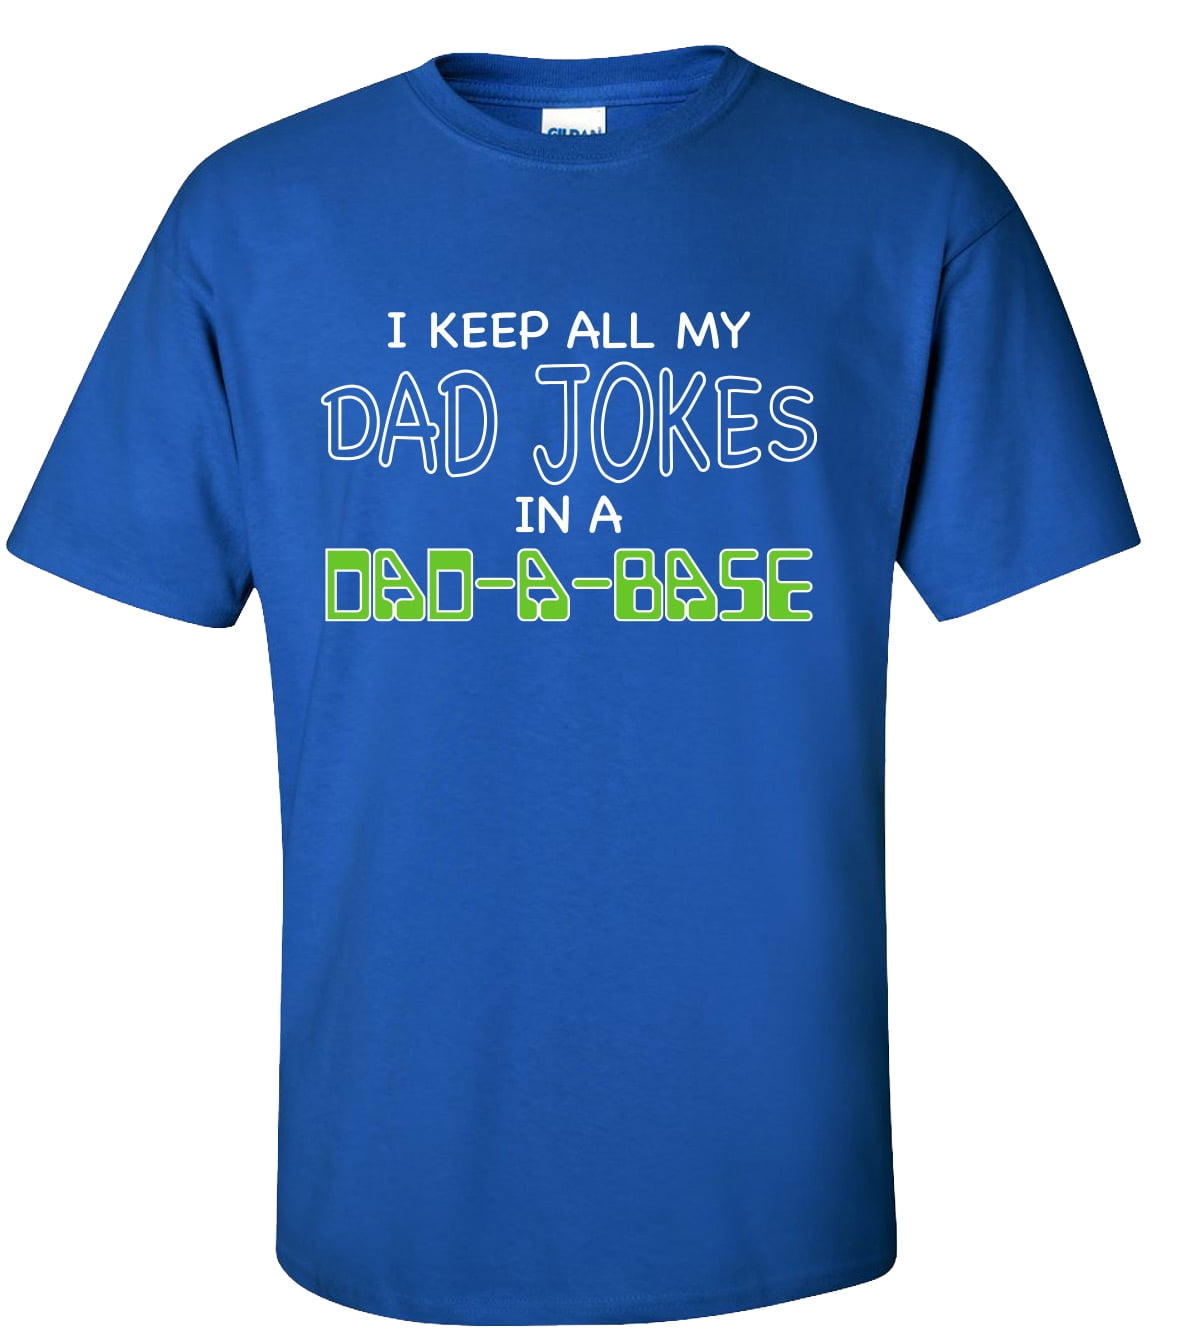 Funny Men's Father's Day I Keep All My Dad Jokes In A Dad-A-Base Short  Sleeve T-Shirt-Royal-Small 